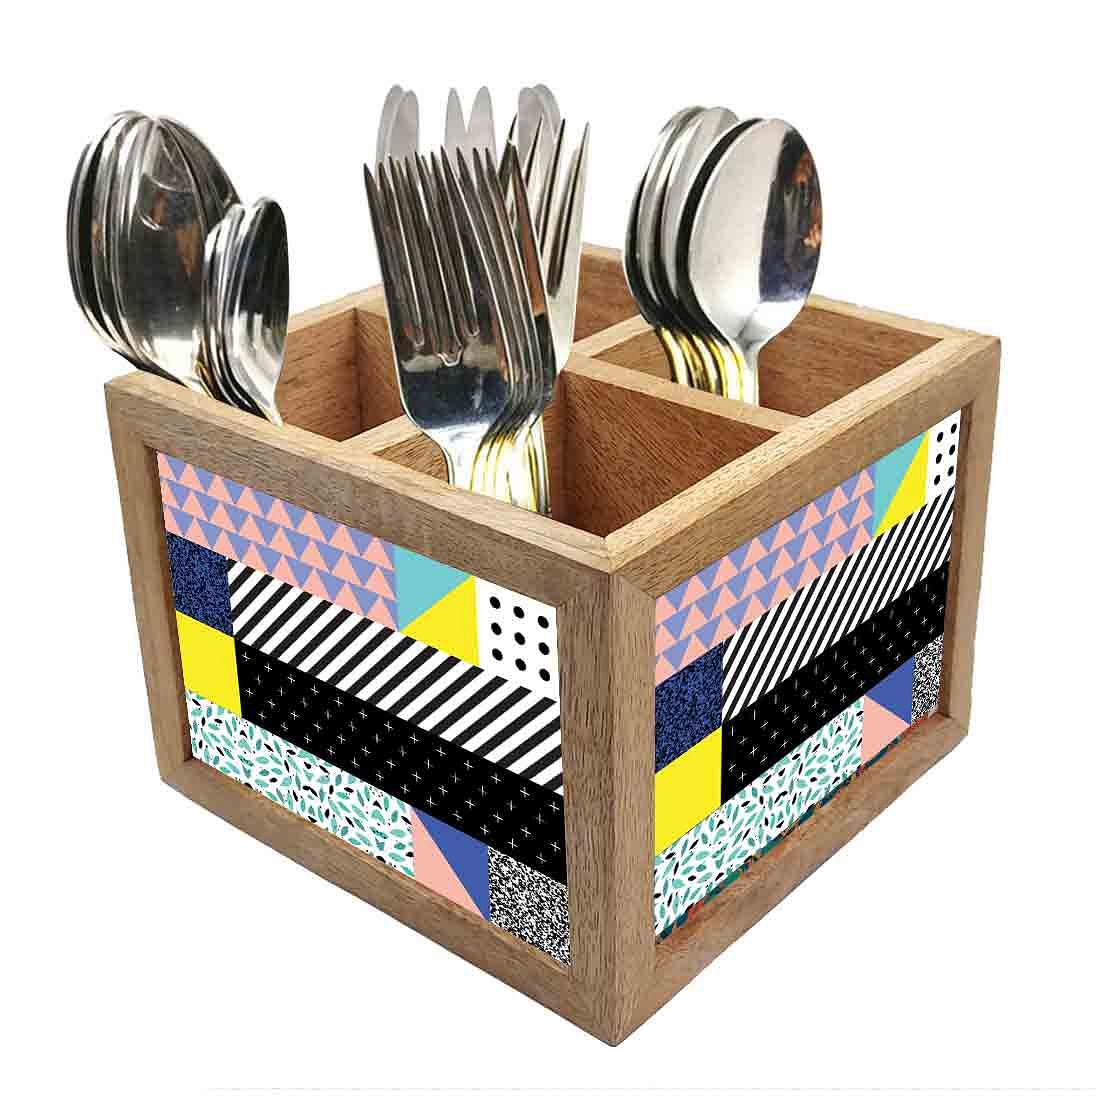 Wooden Spoon Stand for Dining Table Cutlery Holder - Checkbox Pattern Nutcase